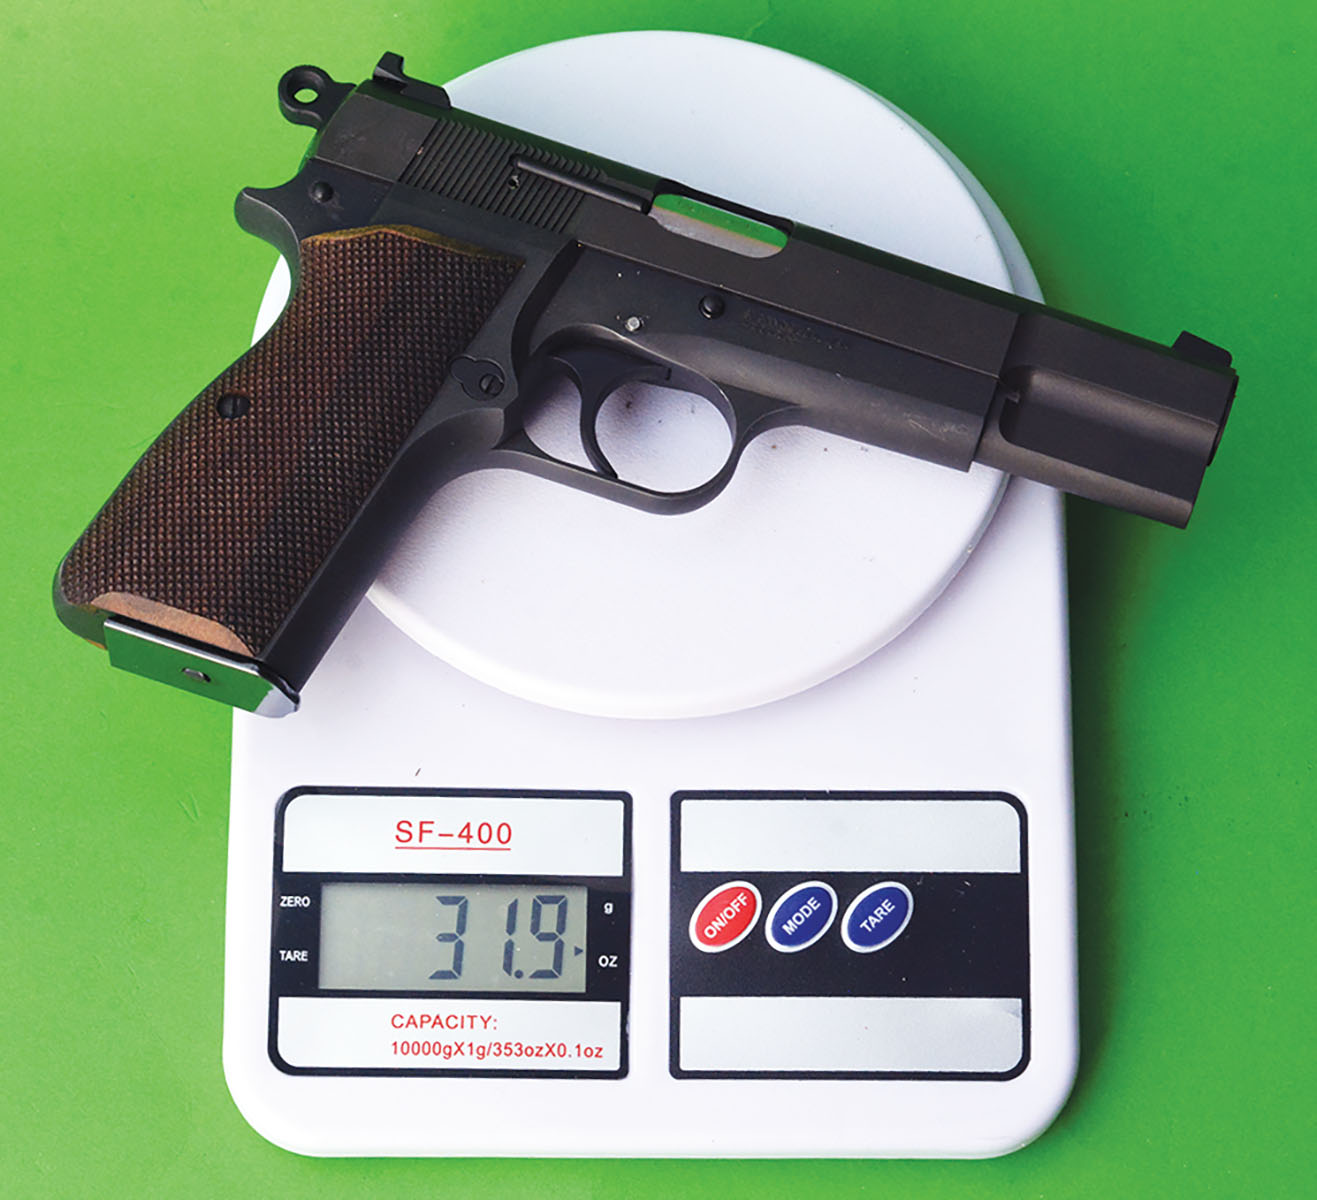 With an empty magazine installed, the SA-35 weighs 31.9 ounces and is constructed of steel.